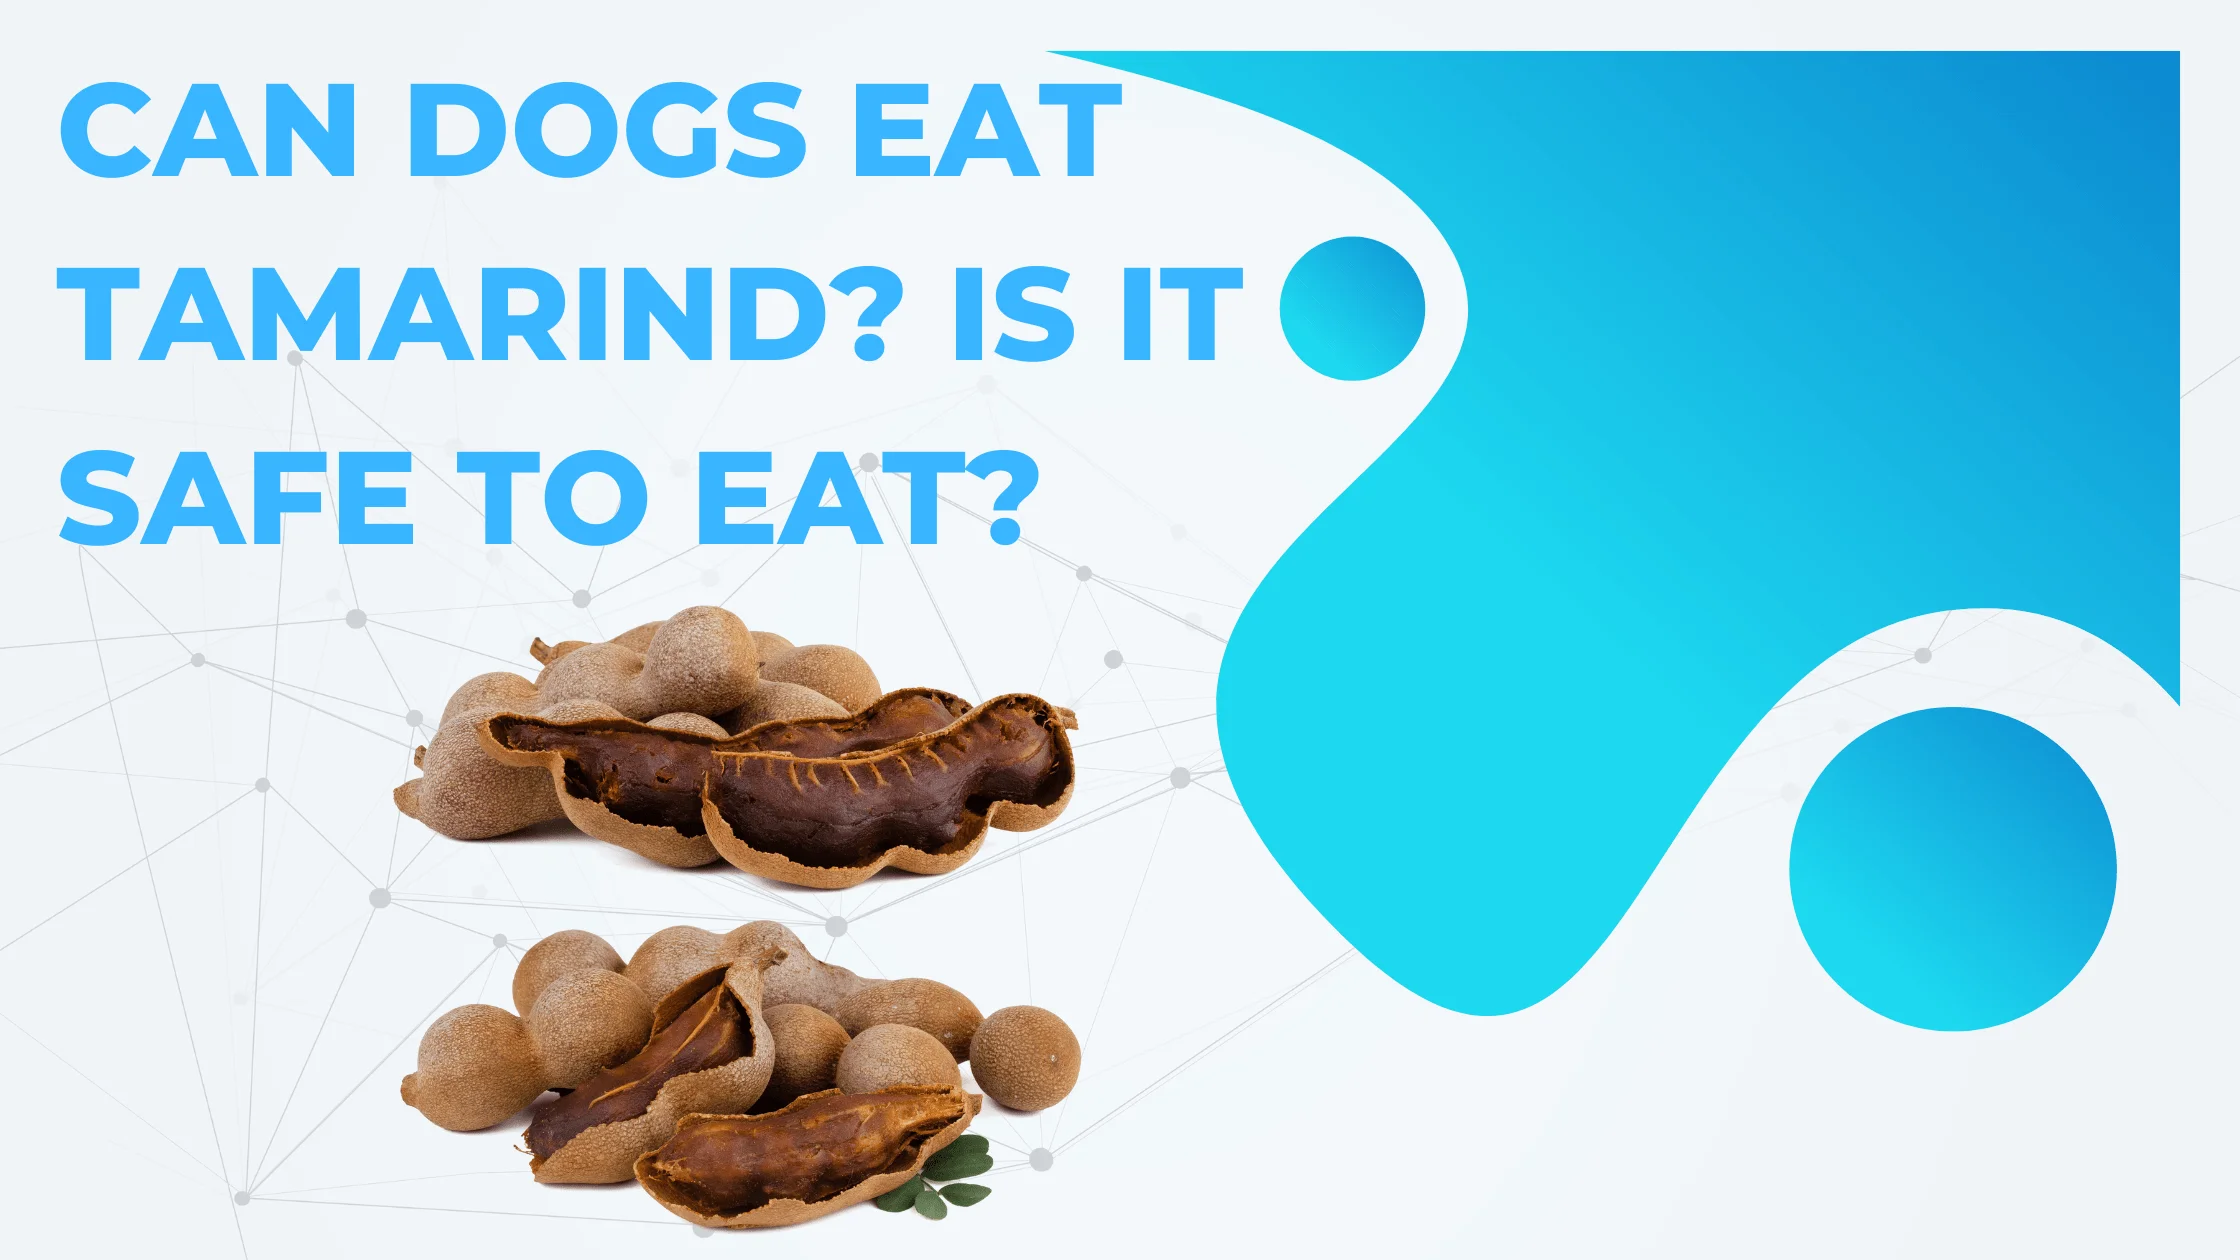 Can Dogs Eat Tamarind? Is it safe to Eat?